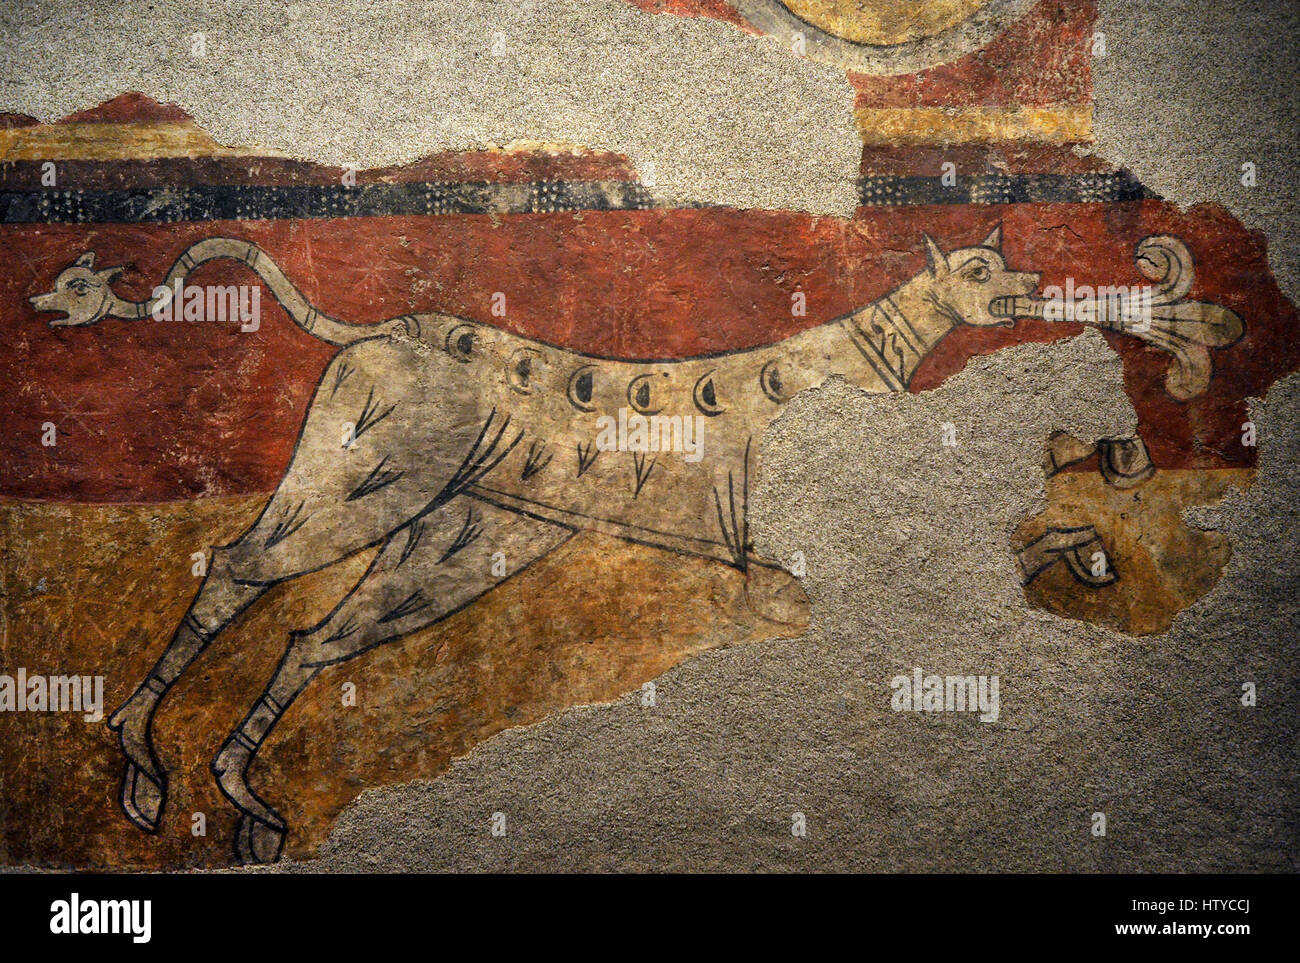 Master of Boi. Quadruped with Fleur-de-lis from Boi. Ca.1100. From the north aisle of the Parish Church of Sant Joan de Boi, Boi Valley. Fresco transferred to canvas. National Art Museum of Catalonia. Barcelona. Catalonia. Spain. Stock Photo